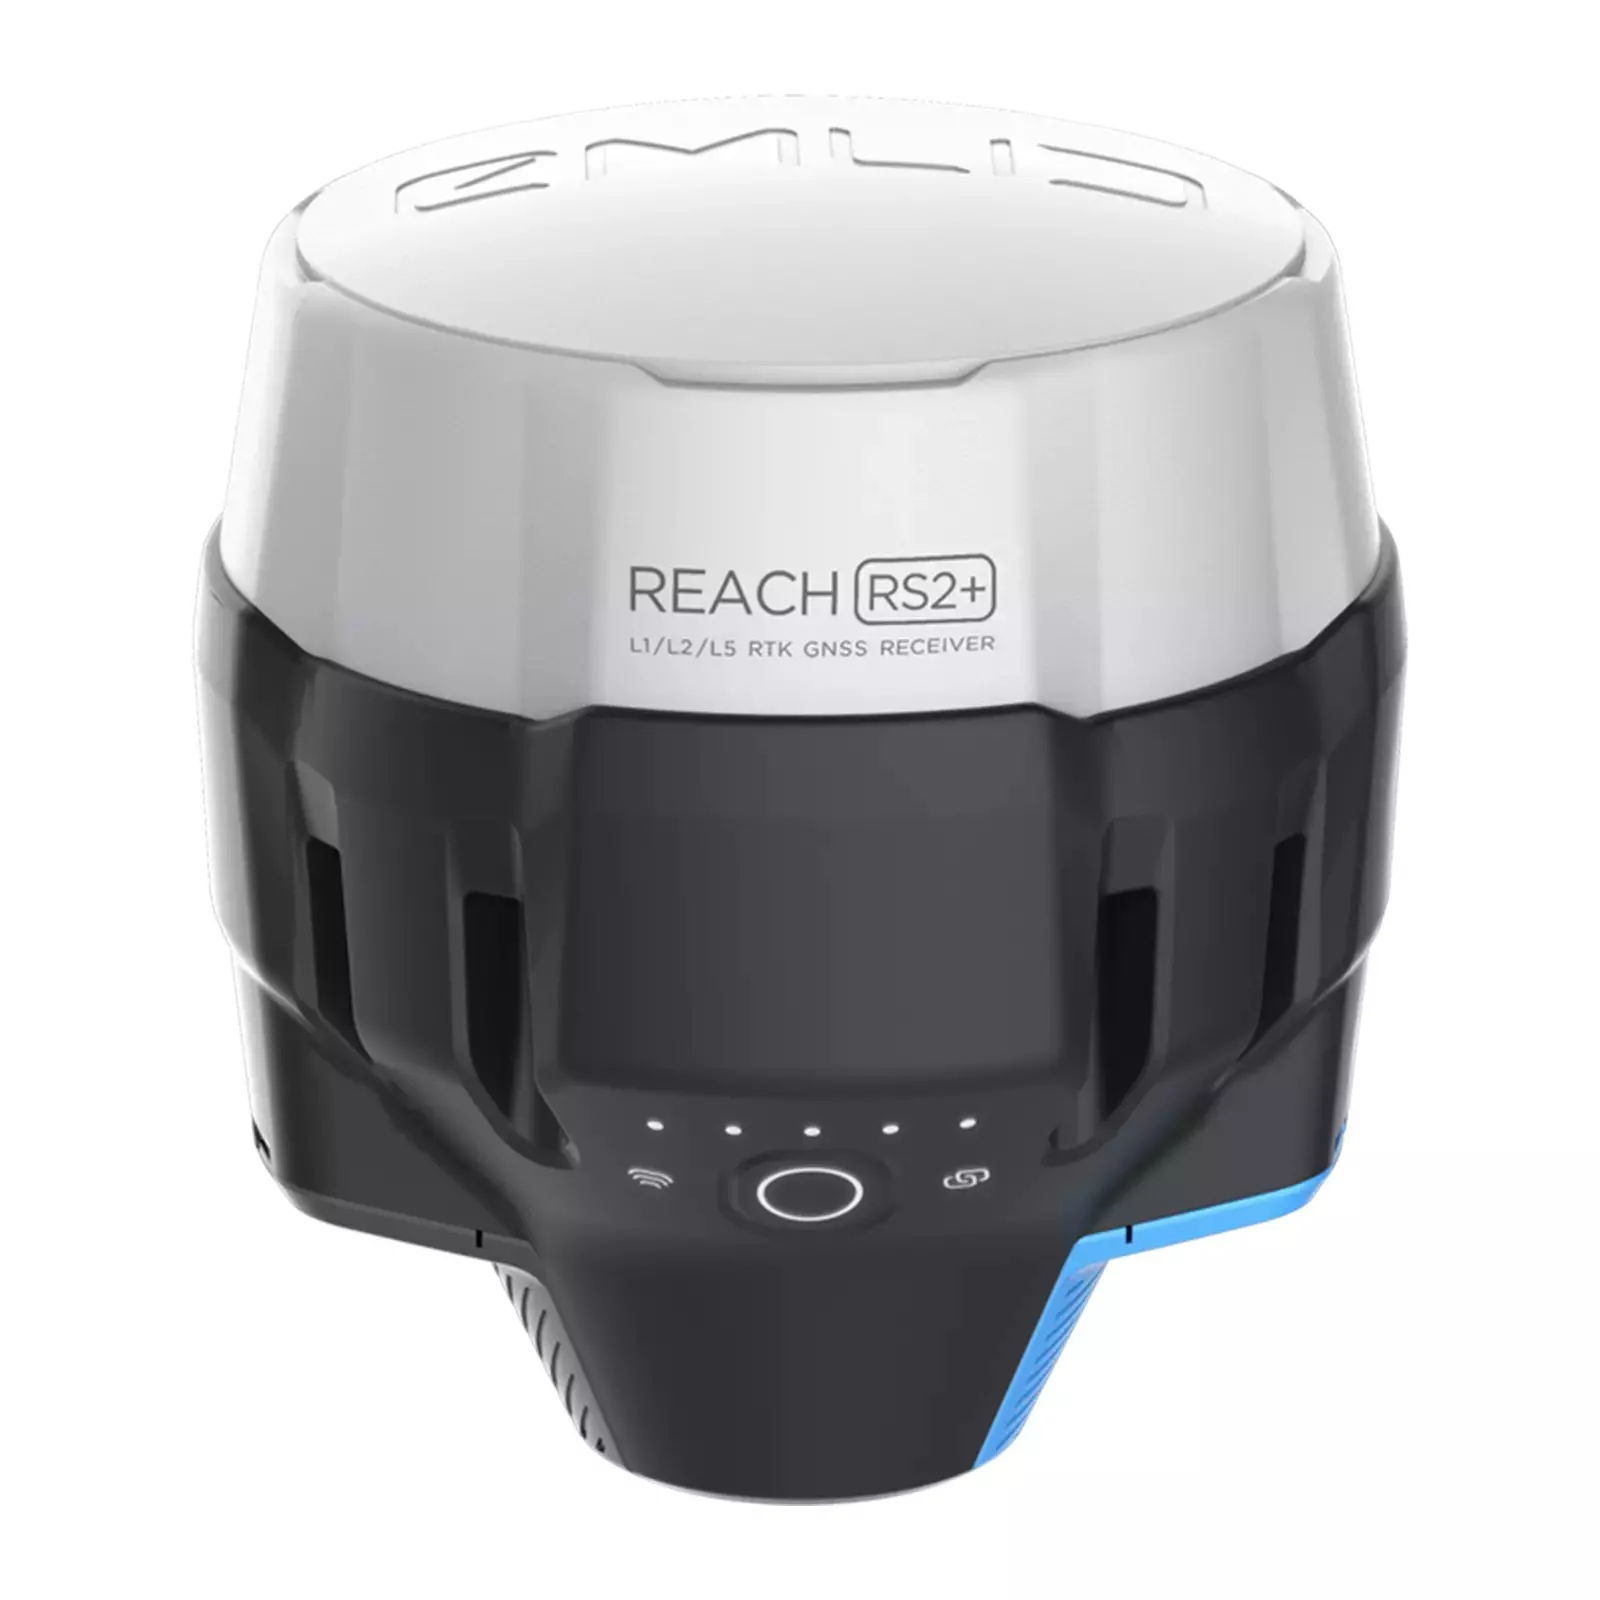 EMLID Reach RS2+ (Multi-Band RTK GNSS Receiver) image 1_EPOTRONIC